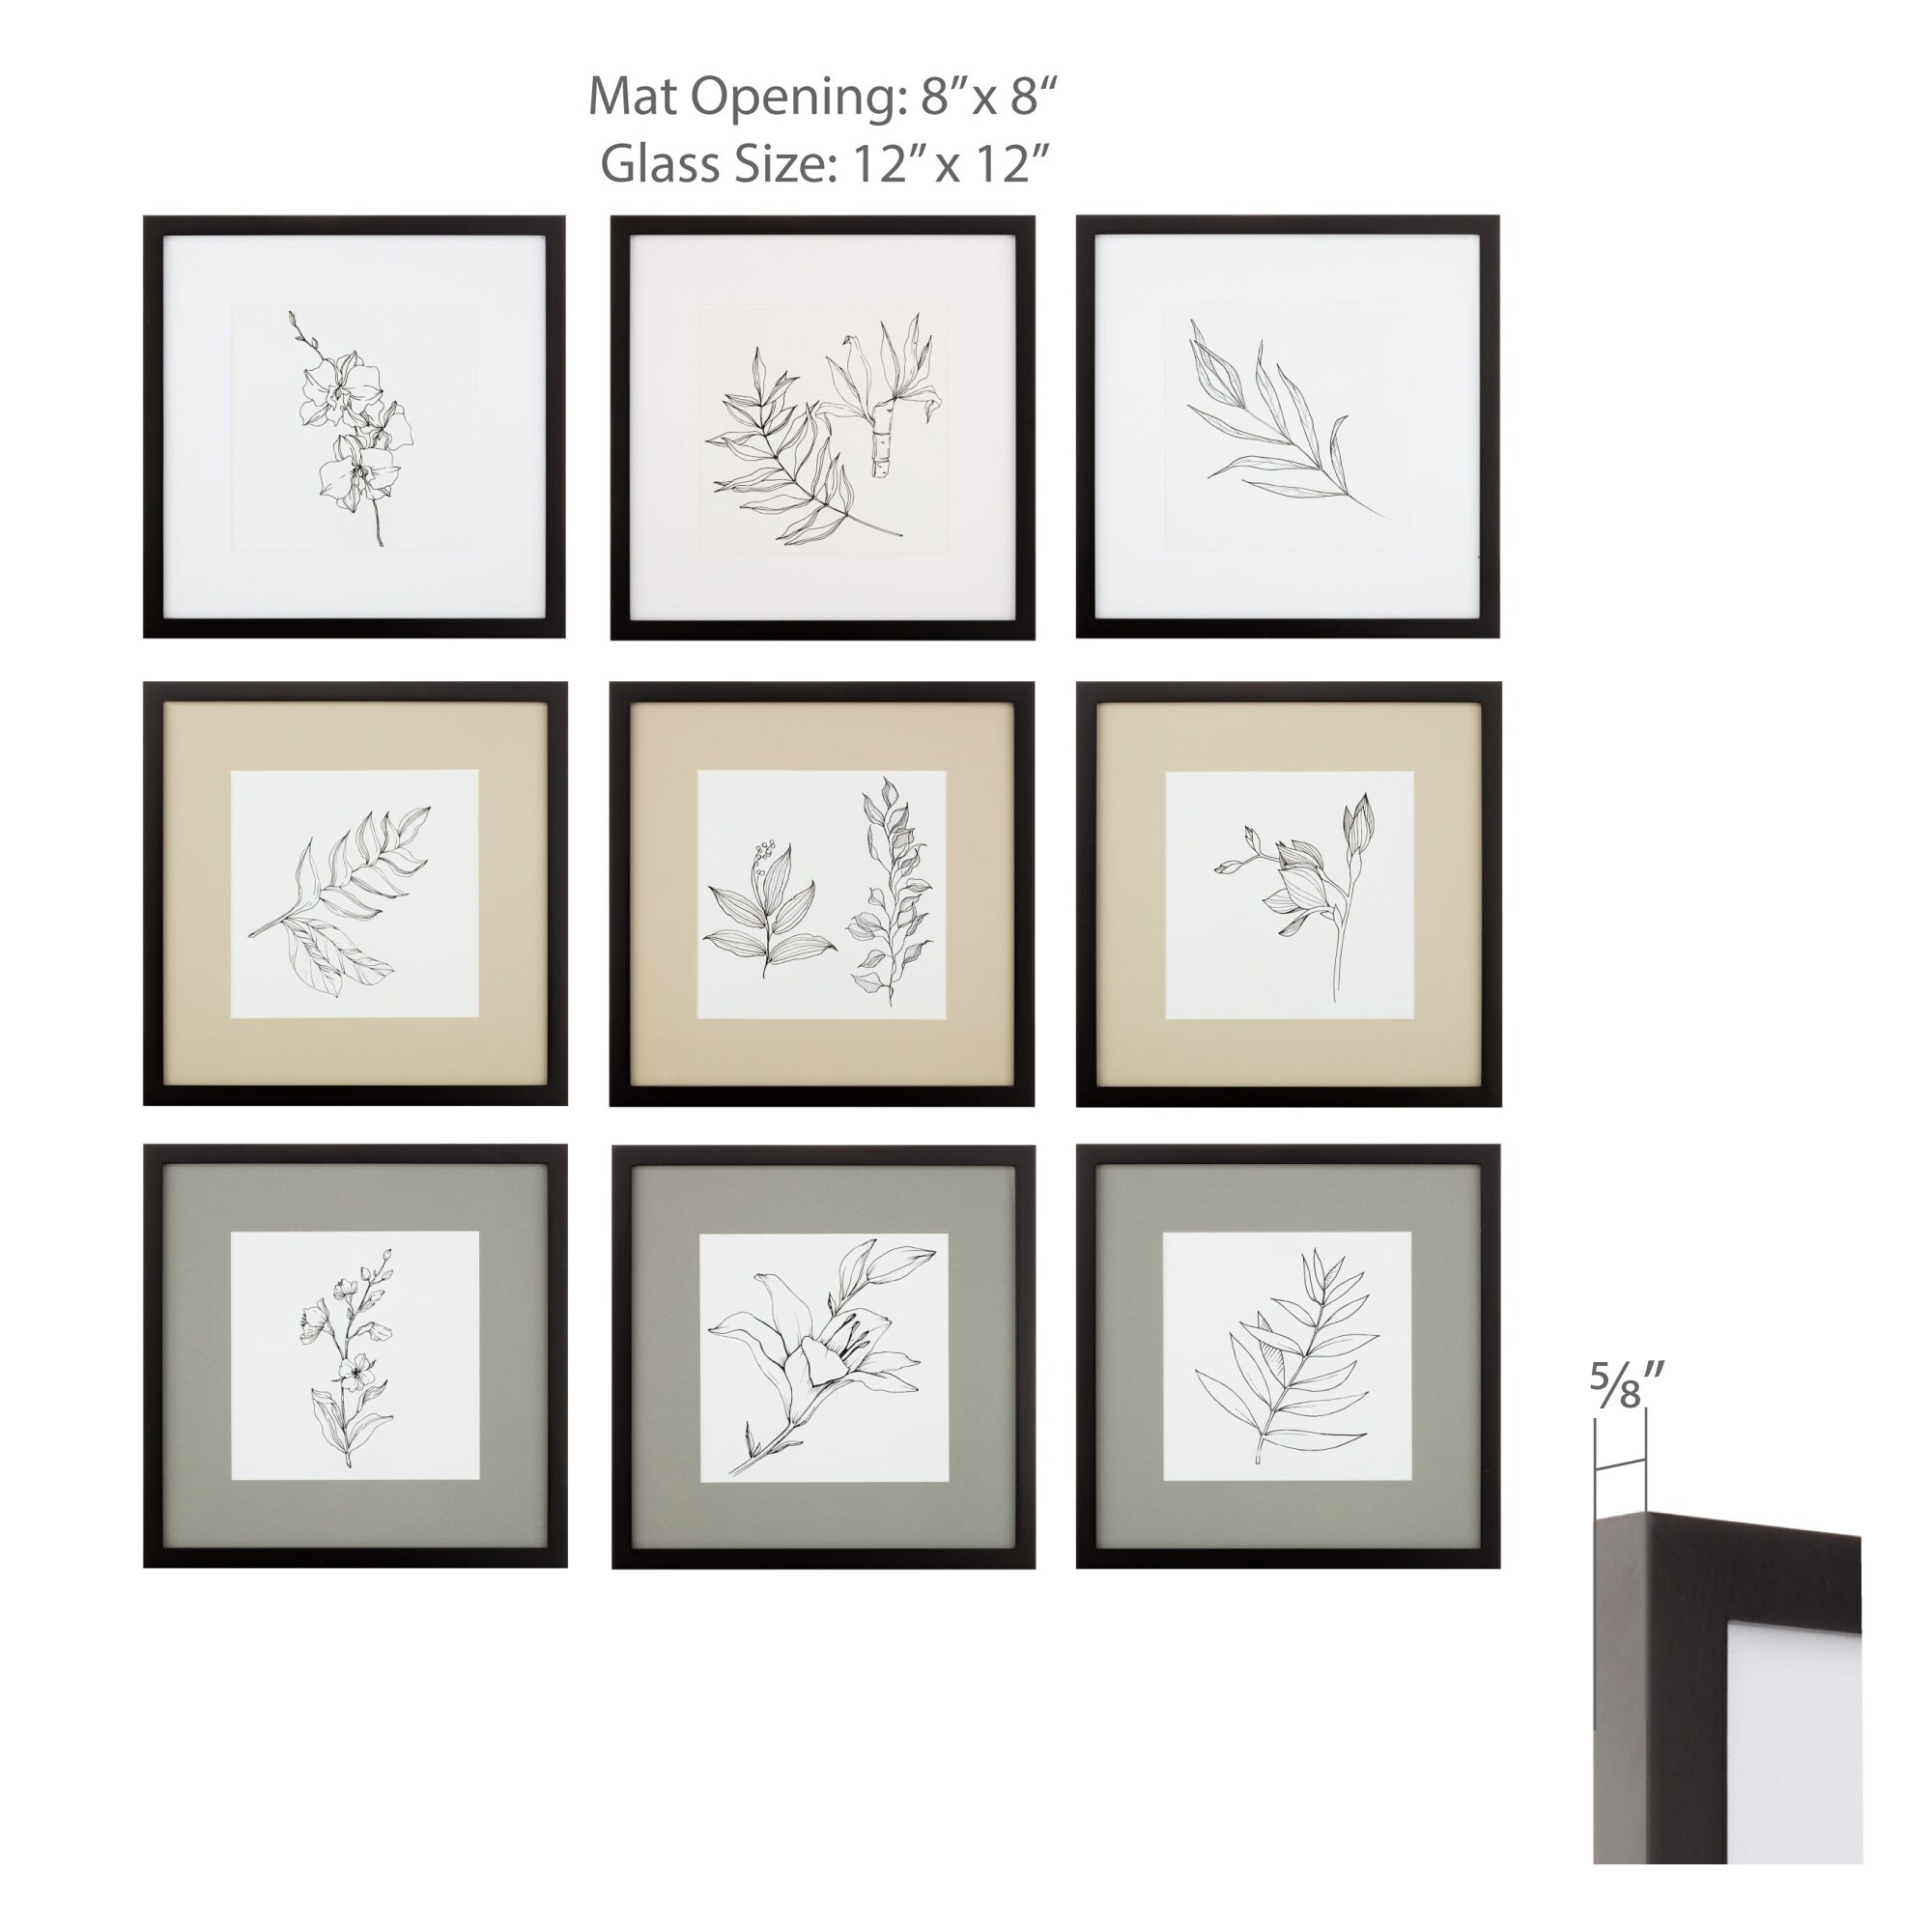 Gallery Perfect Set of 9 Piece White Square Photo Frames with Double White  Mat Wall Gallery Kit. Includes: Hanging Template, Art Prints and Hanging